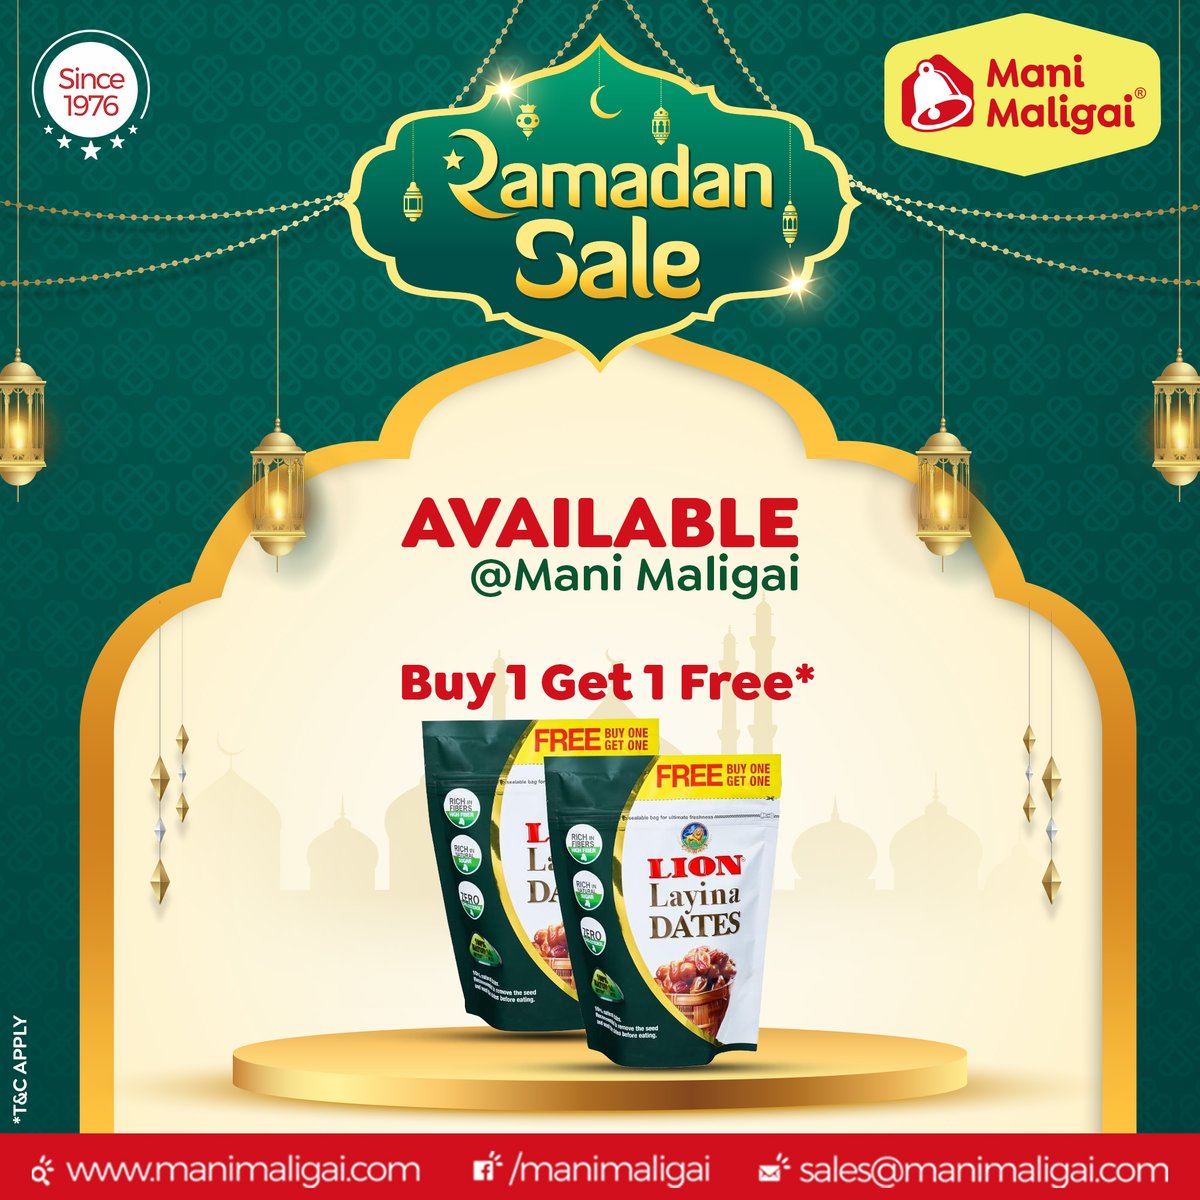 🌙✨ Get ready for Ramzan with our special offer at Mani Maligai Supermarket! Buy one Lion Dates pack, get one FREE! Don't miss out!🛒 📞99924 99924 linkto.contact/MM-WA manimaligai.com #Manimaligai #Pollachi #Supermarket #RamalanSale #LionDates #SpecialOffer